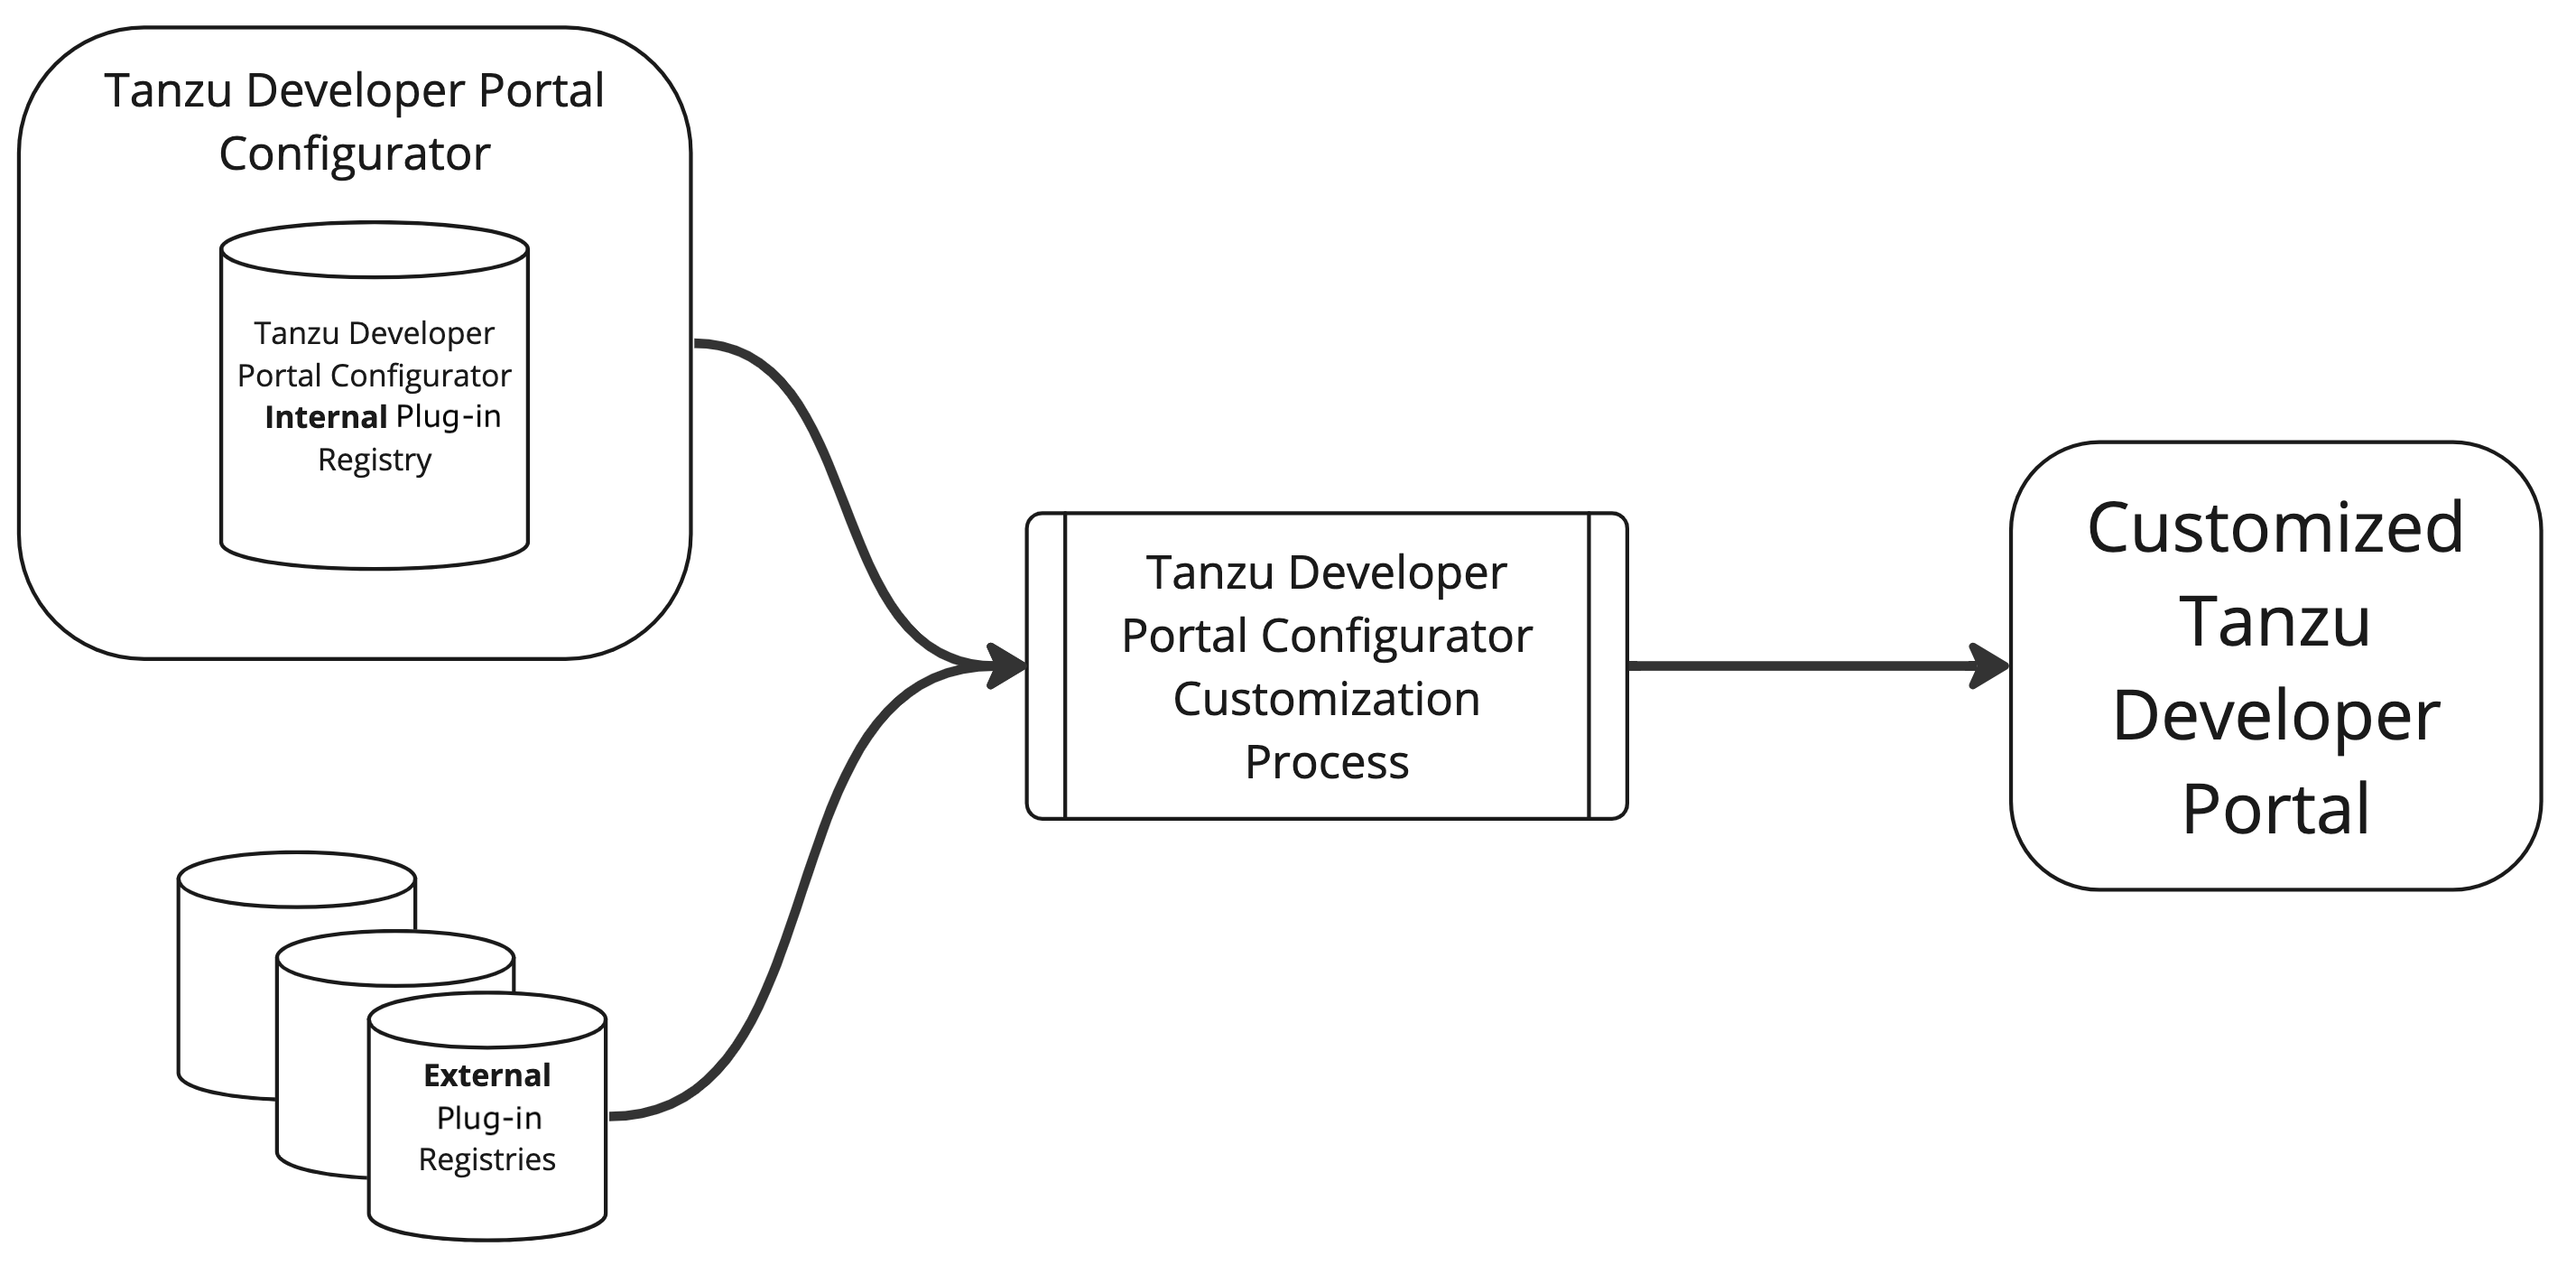 Diagram of Tanzu Developer Portal Foundation, the included internal plug-in registry, and the customization process.